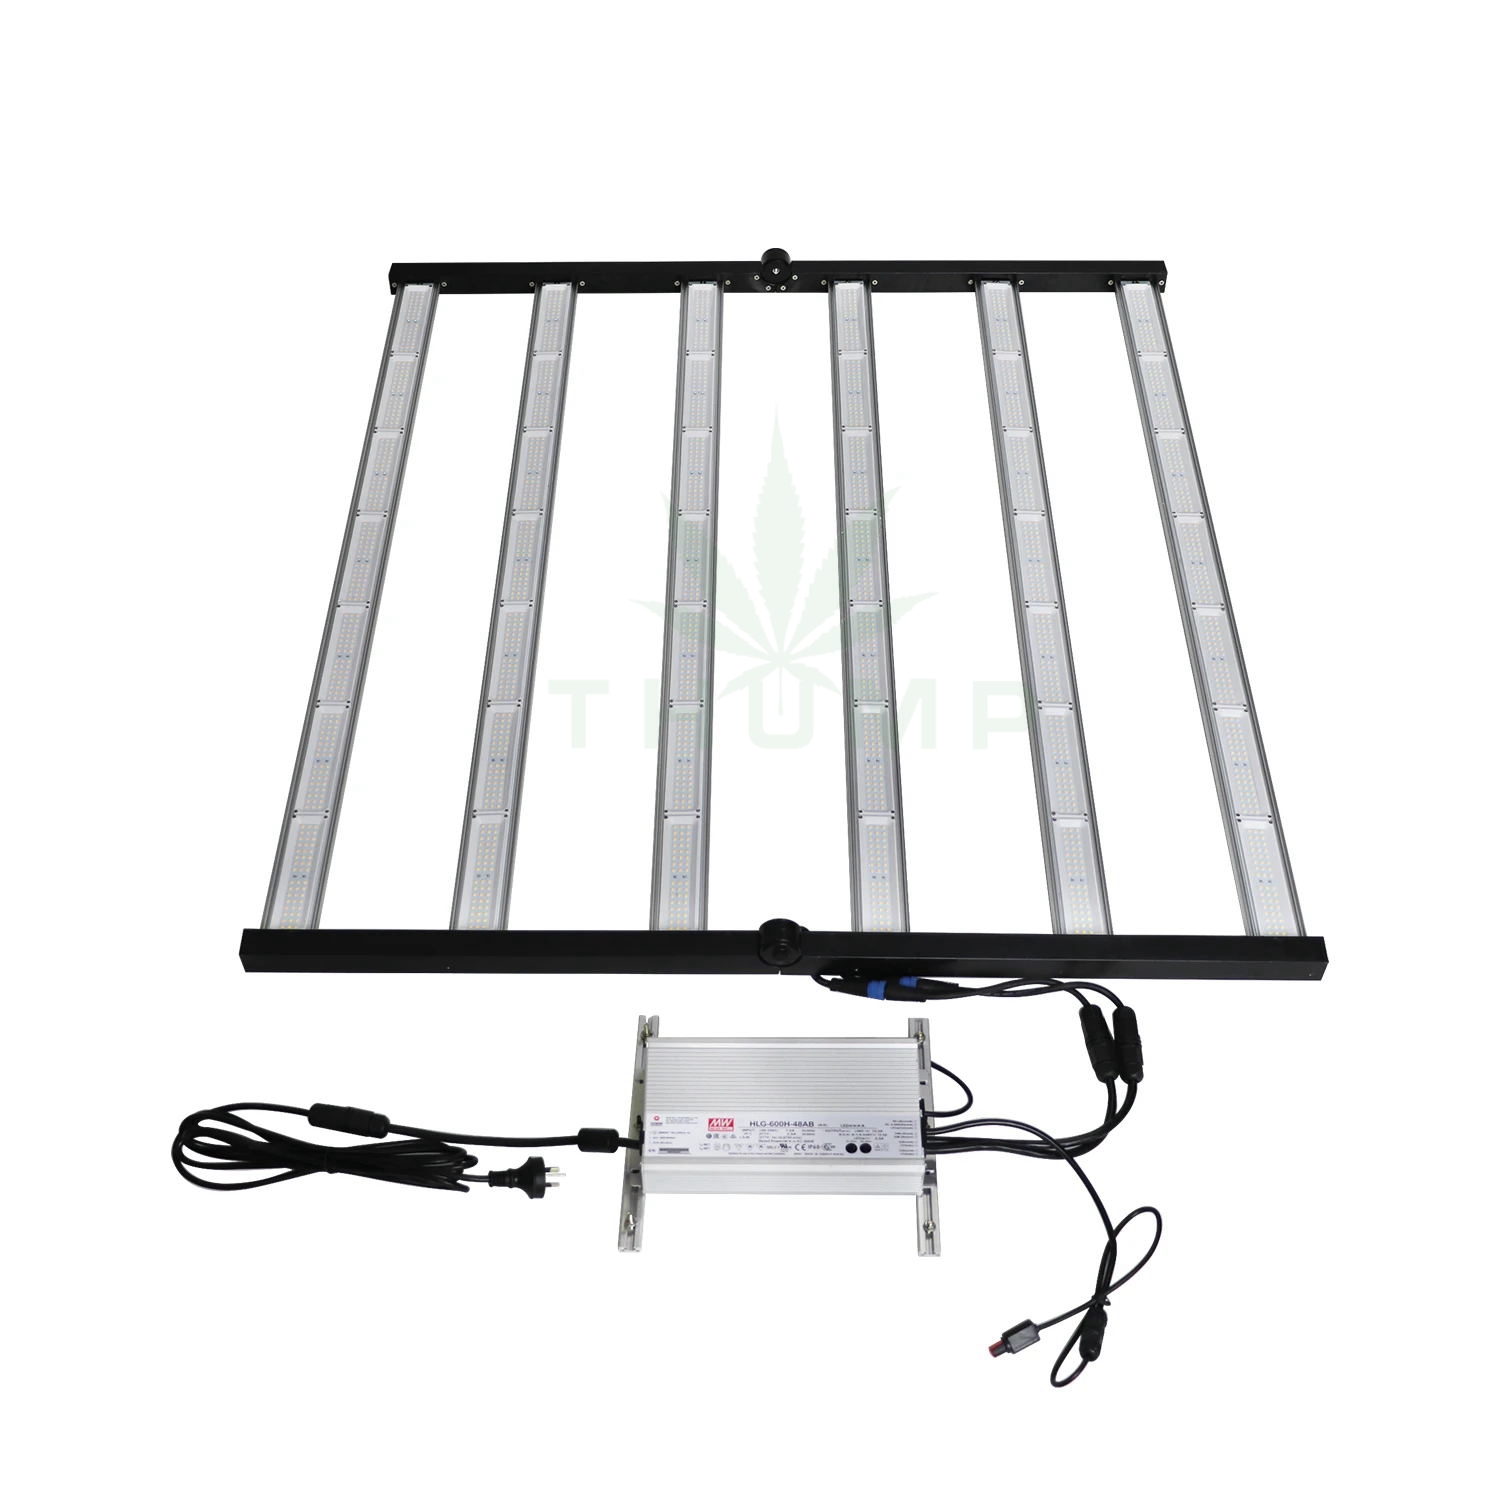 Best Samsung LM301H Led Grow Light Bar with 180 Degrees Foldable